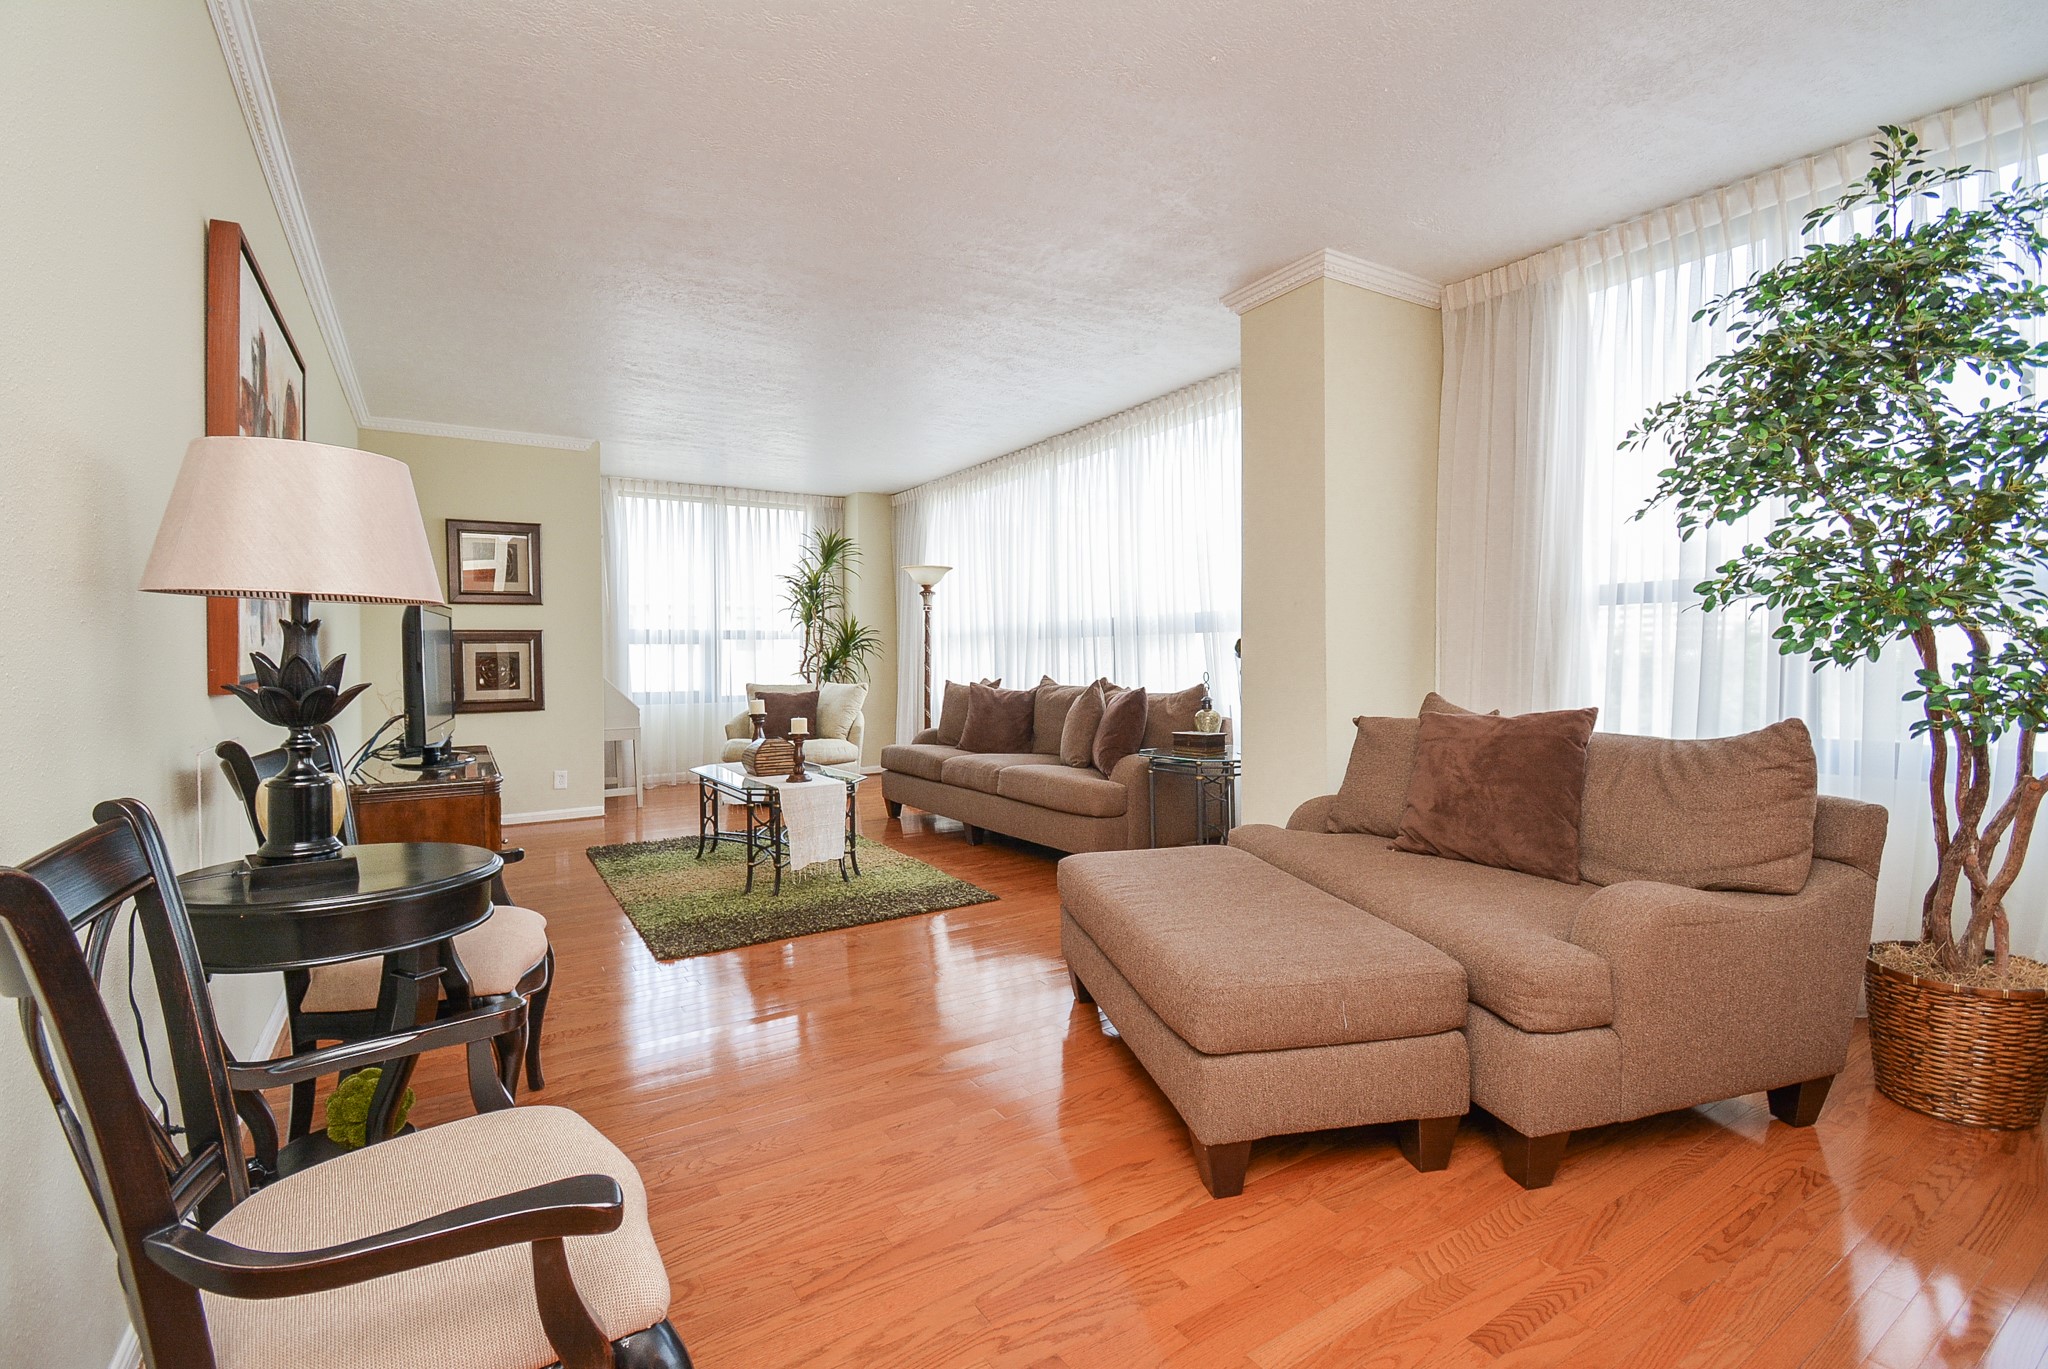 Corner unit with windows galore!!!  Wood floors in the living, dining and hallways.  This is the roomy living area.